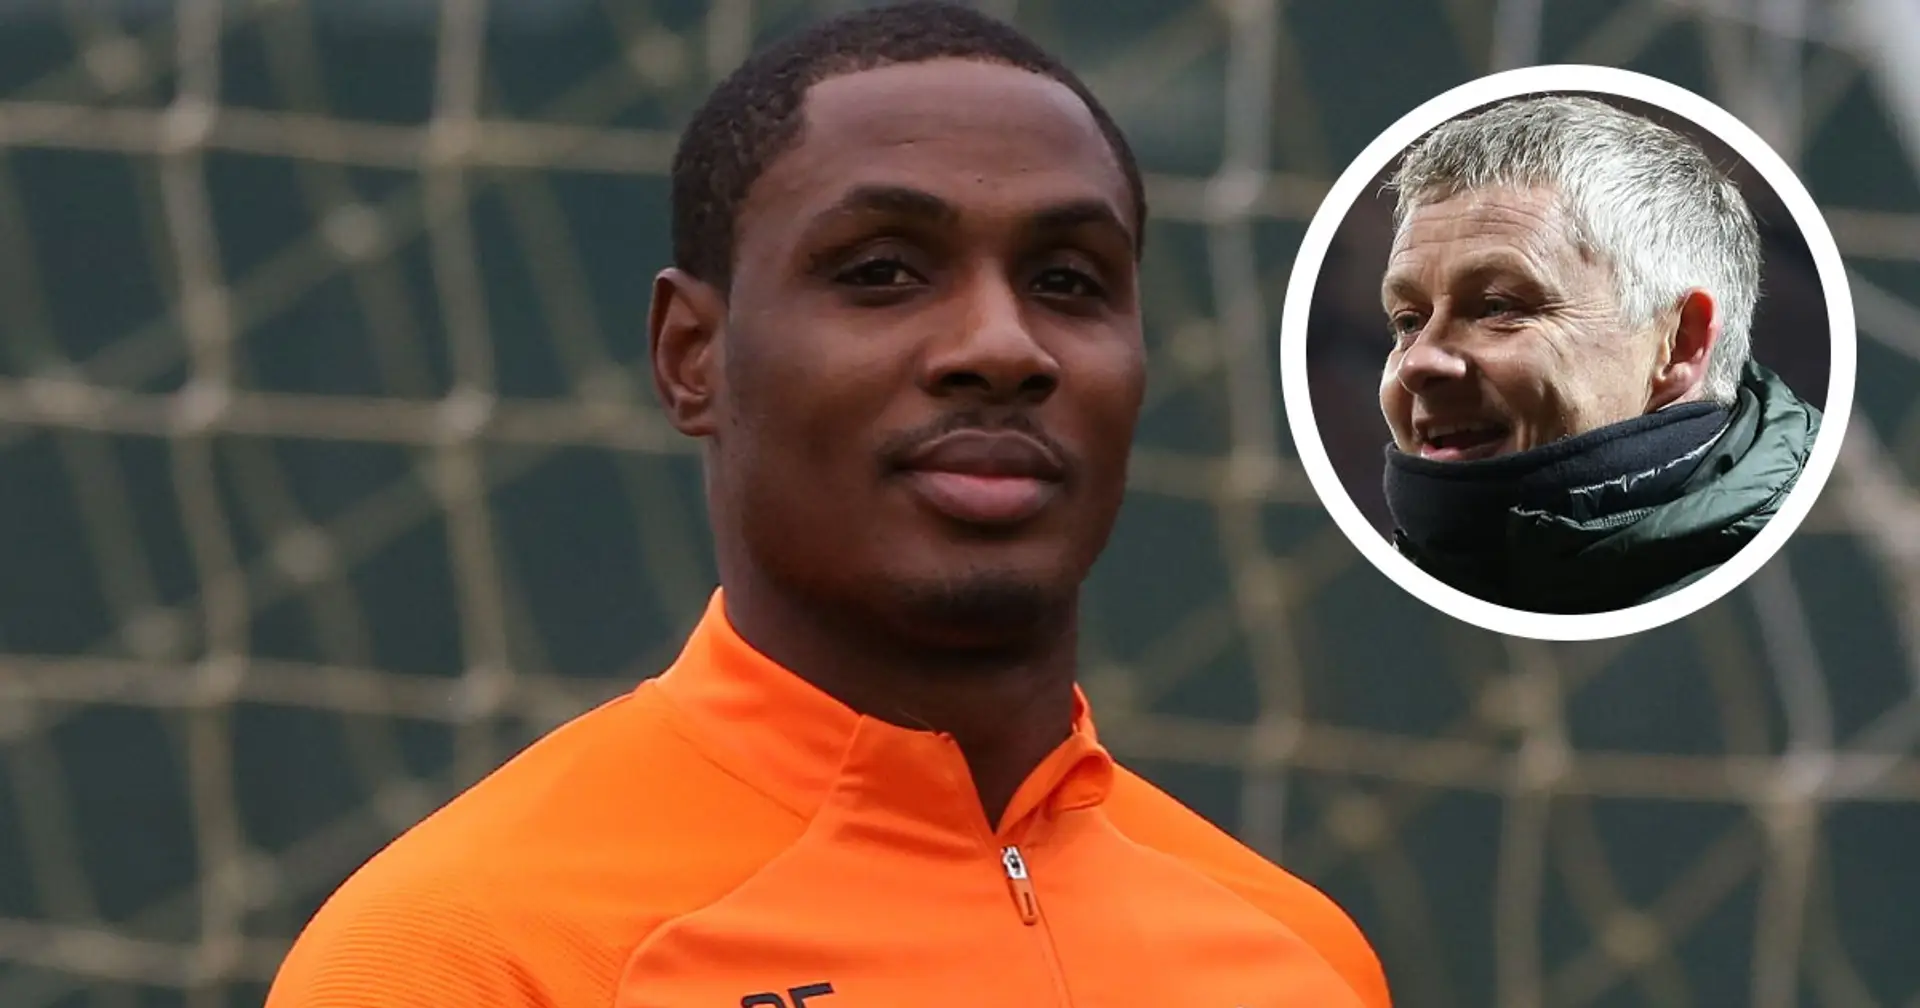 ‘He was the top scorer in round-robin we just finished’: Solskjaer confirms Ighalo spot in Watford squad